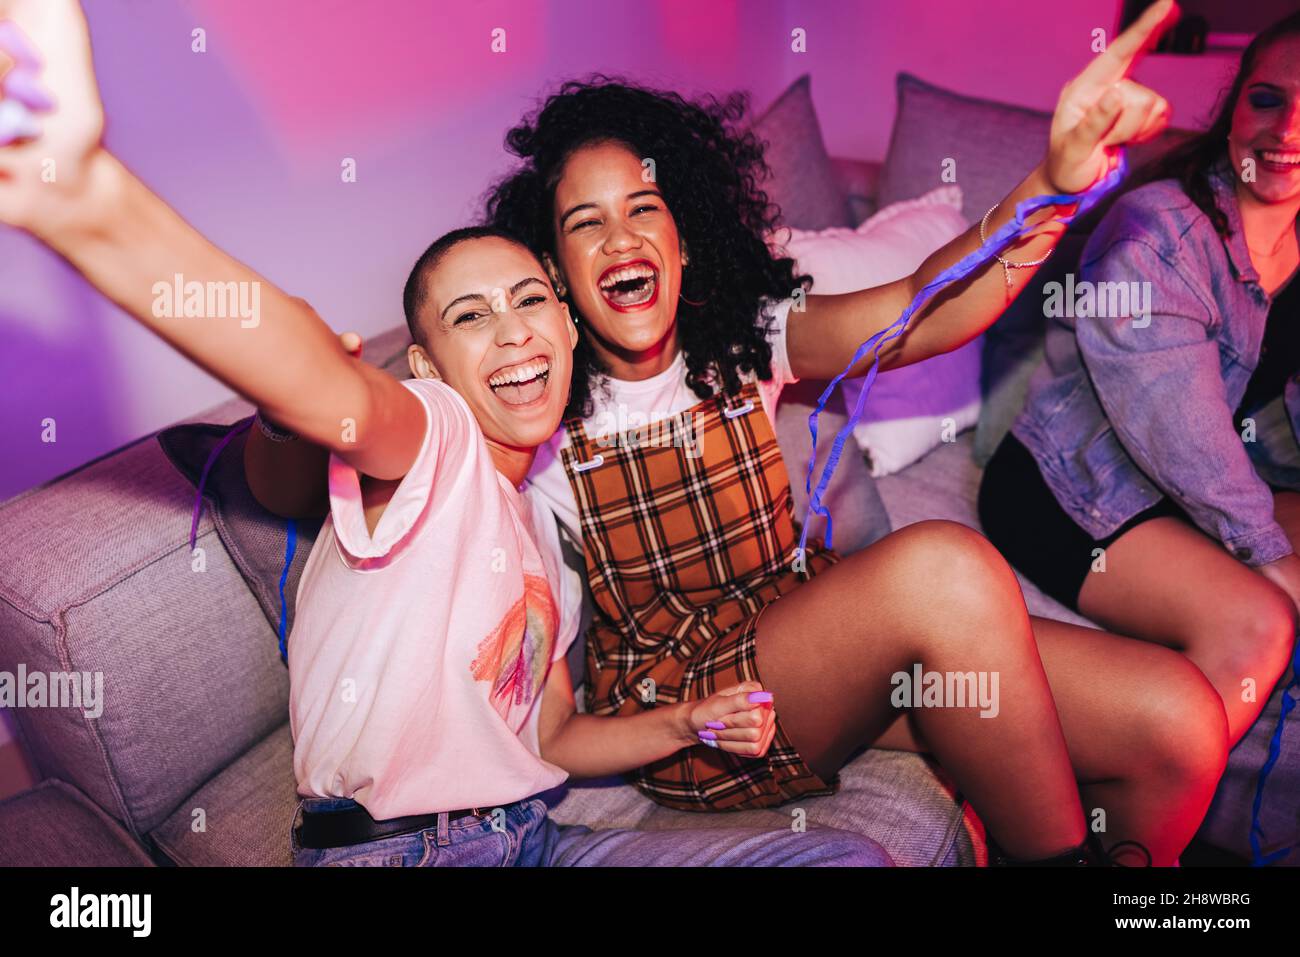 Best friends having a good time at a house party. Vibrant female friends cheering happily while sitting on a couch in neon light. Cheerful young women Stock Photo